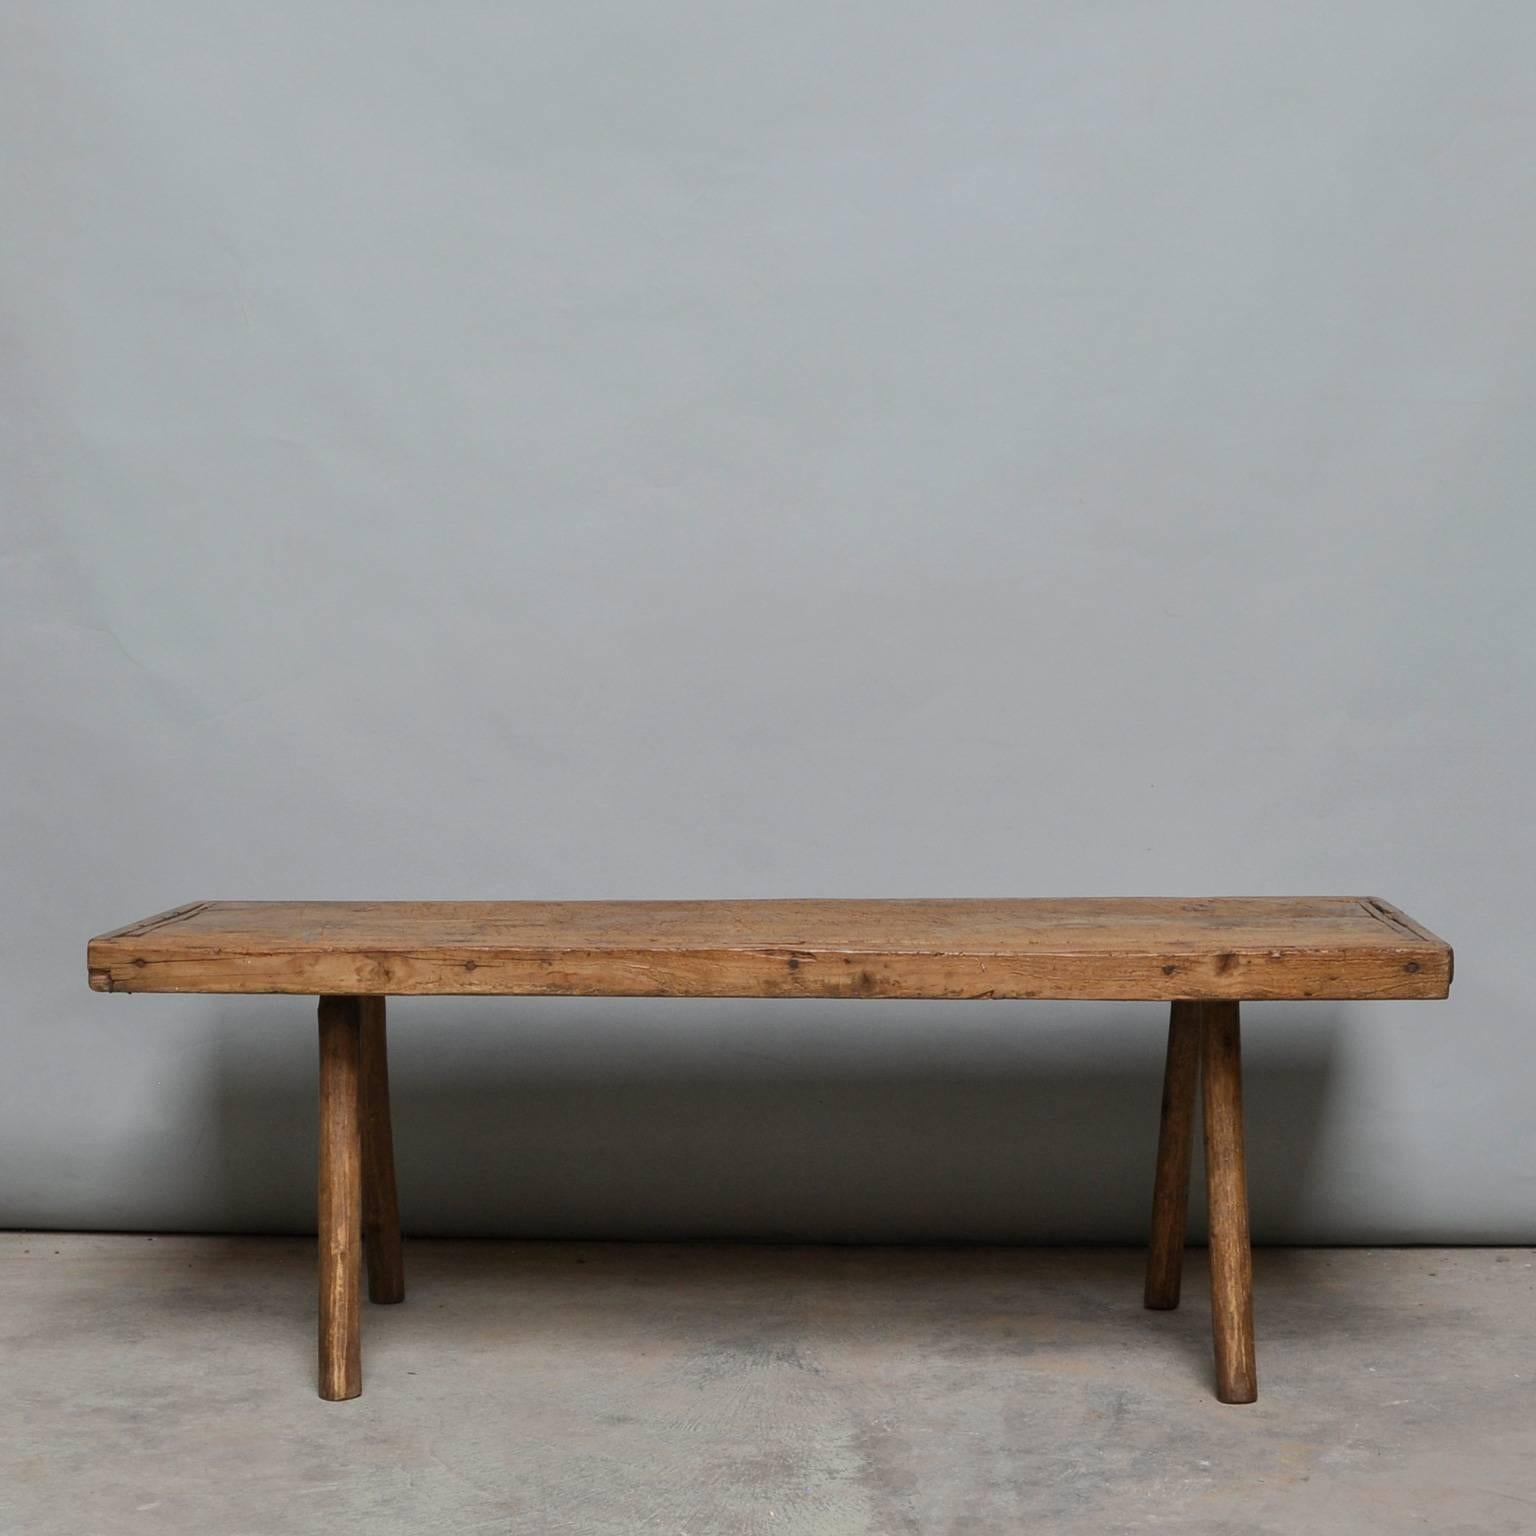 This oak butcher's block was produced in Hungary, circa 1930s. The piece features the original oak legs, and has been wax-finished. The legs has been cut down to a standard coffee table or bench size.